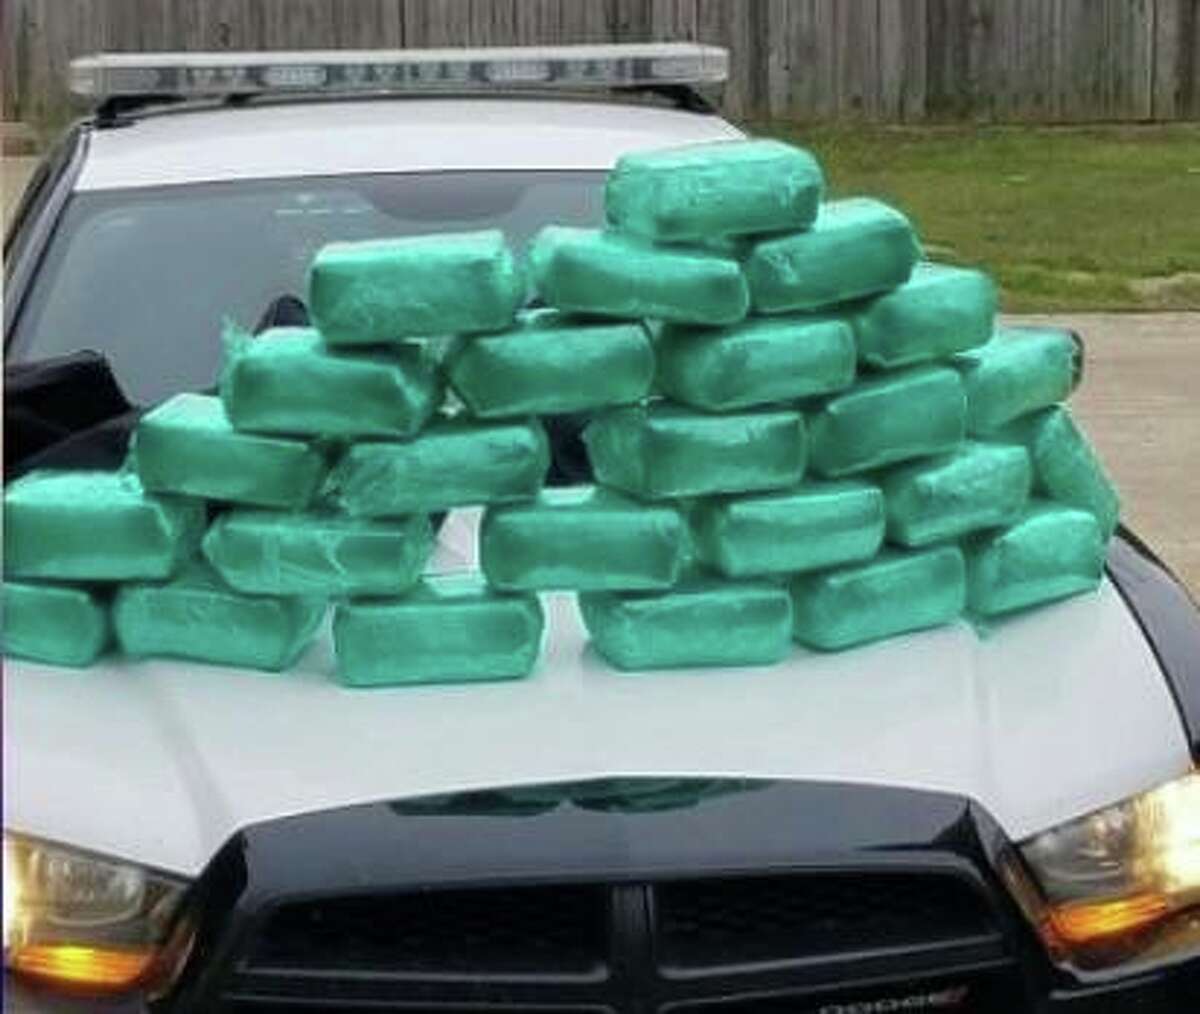 Texas State Troopers seized $7 million in cocaine, allegedly on its way to Chicago, during a traffic stop near Texarkana on March 4. SLIDESHOW: Biggest drug busts on the Texas-Mexico border